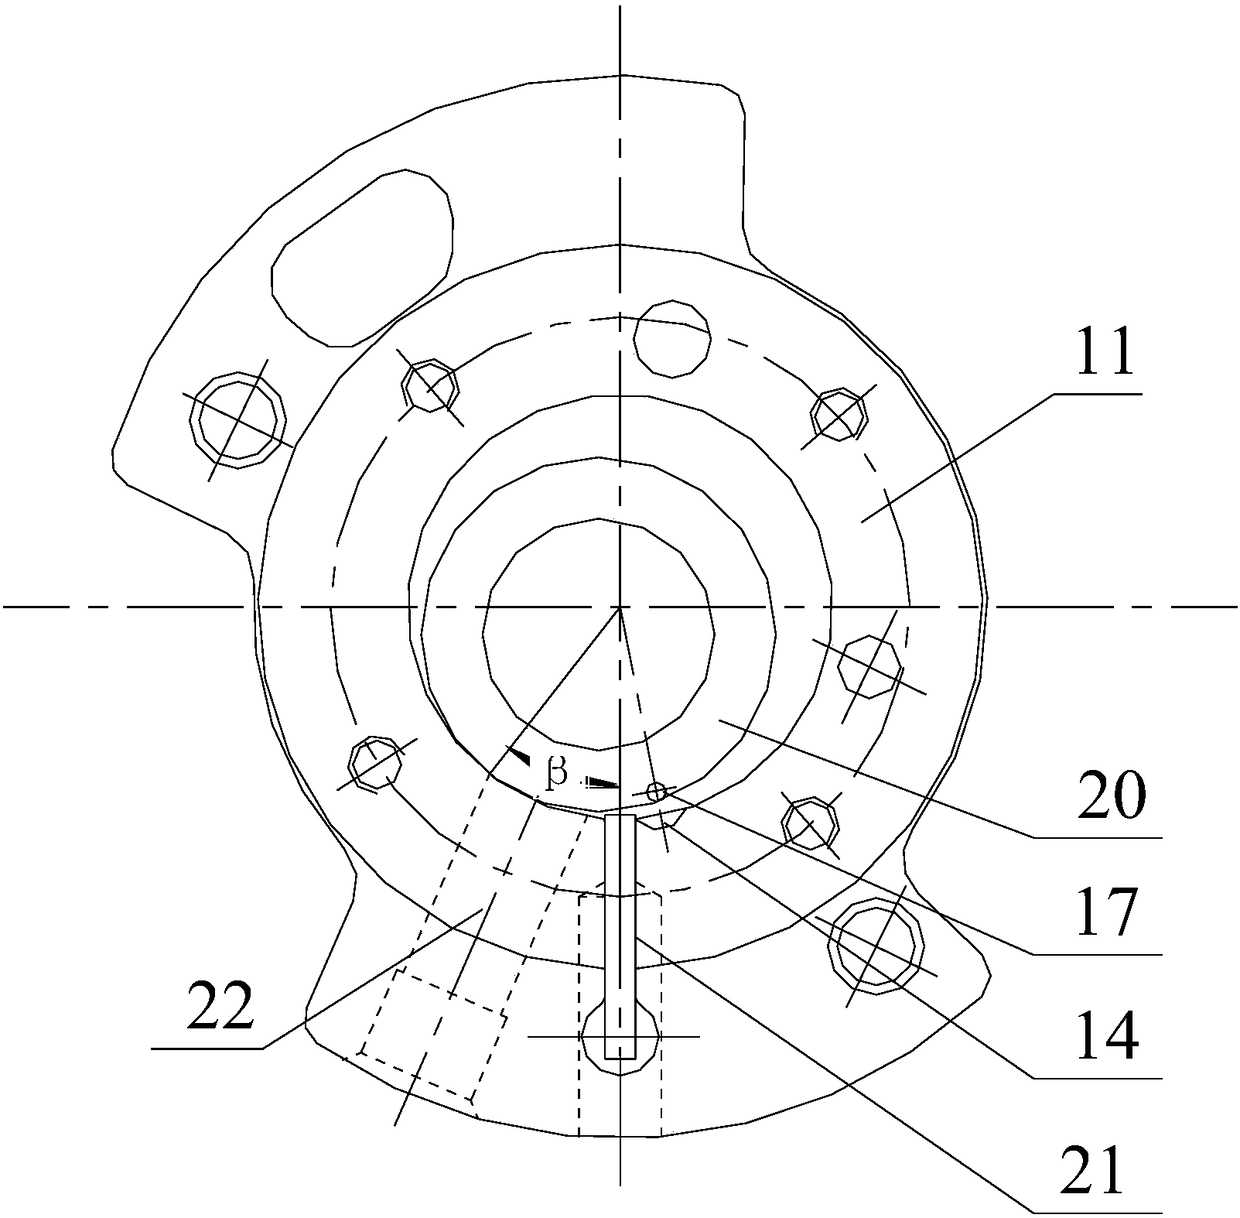 Rotary compressor and electrical products including the same